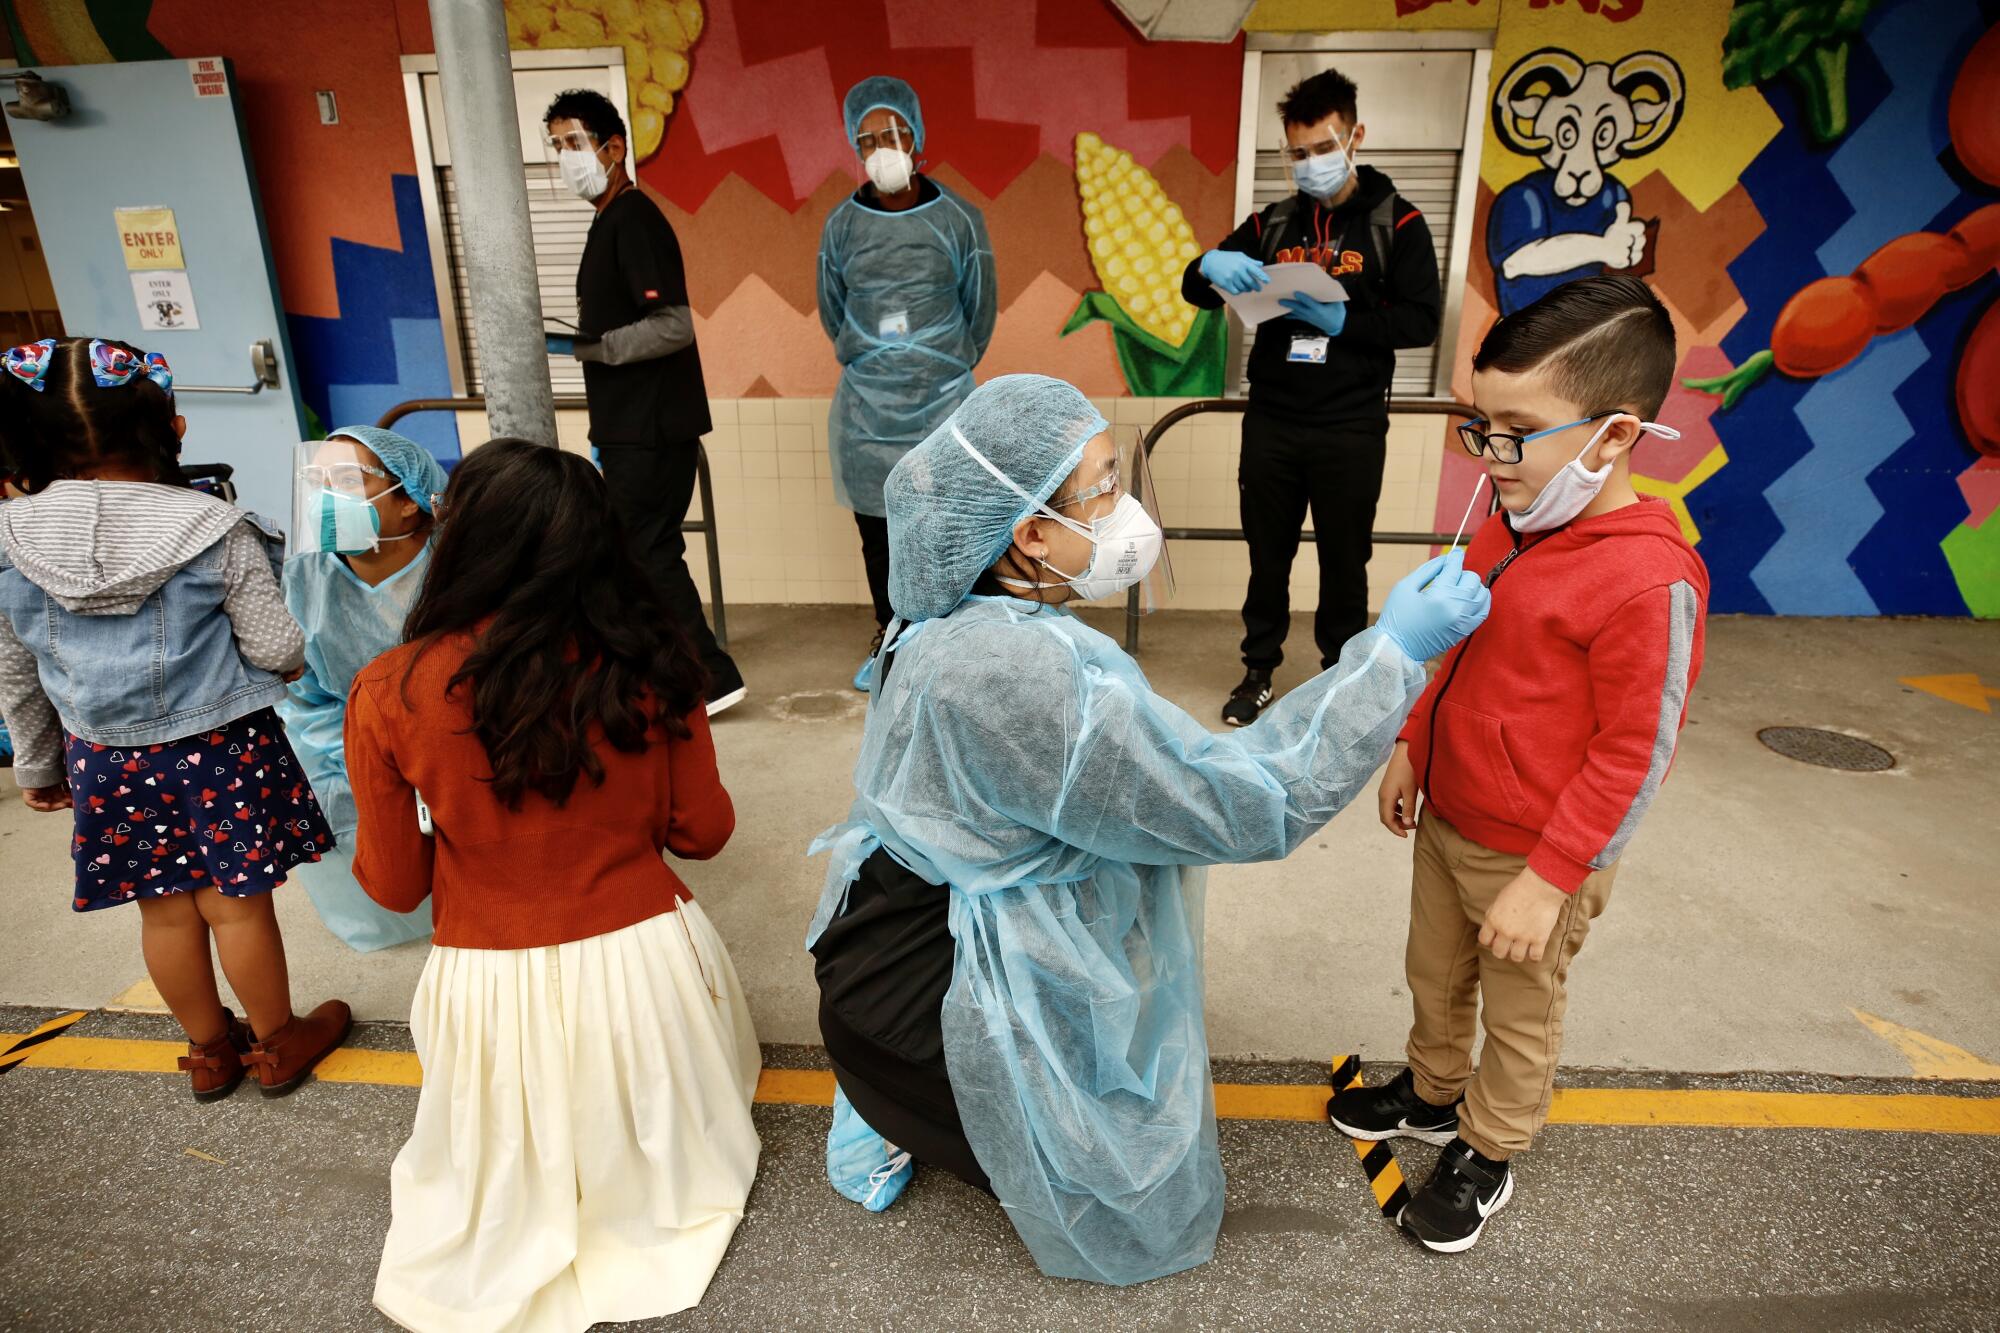 Women in protective gear kneel in front of young students to conduct nasal swab tests.